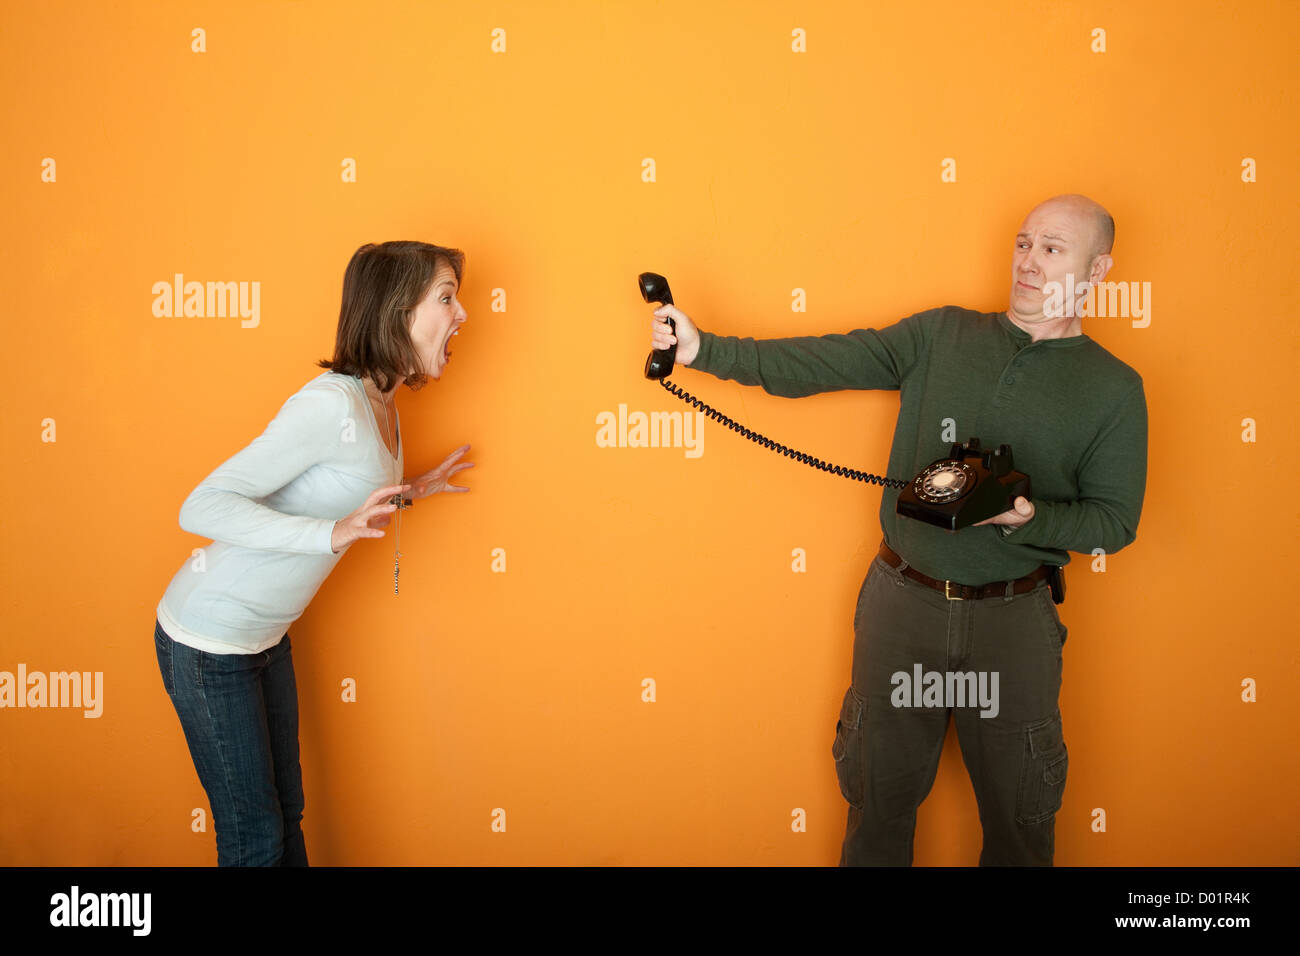 Man holds telephone while woman yells at it Stock Photo